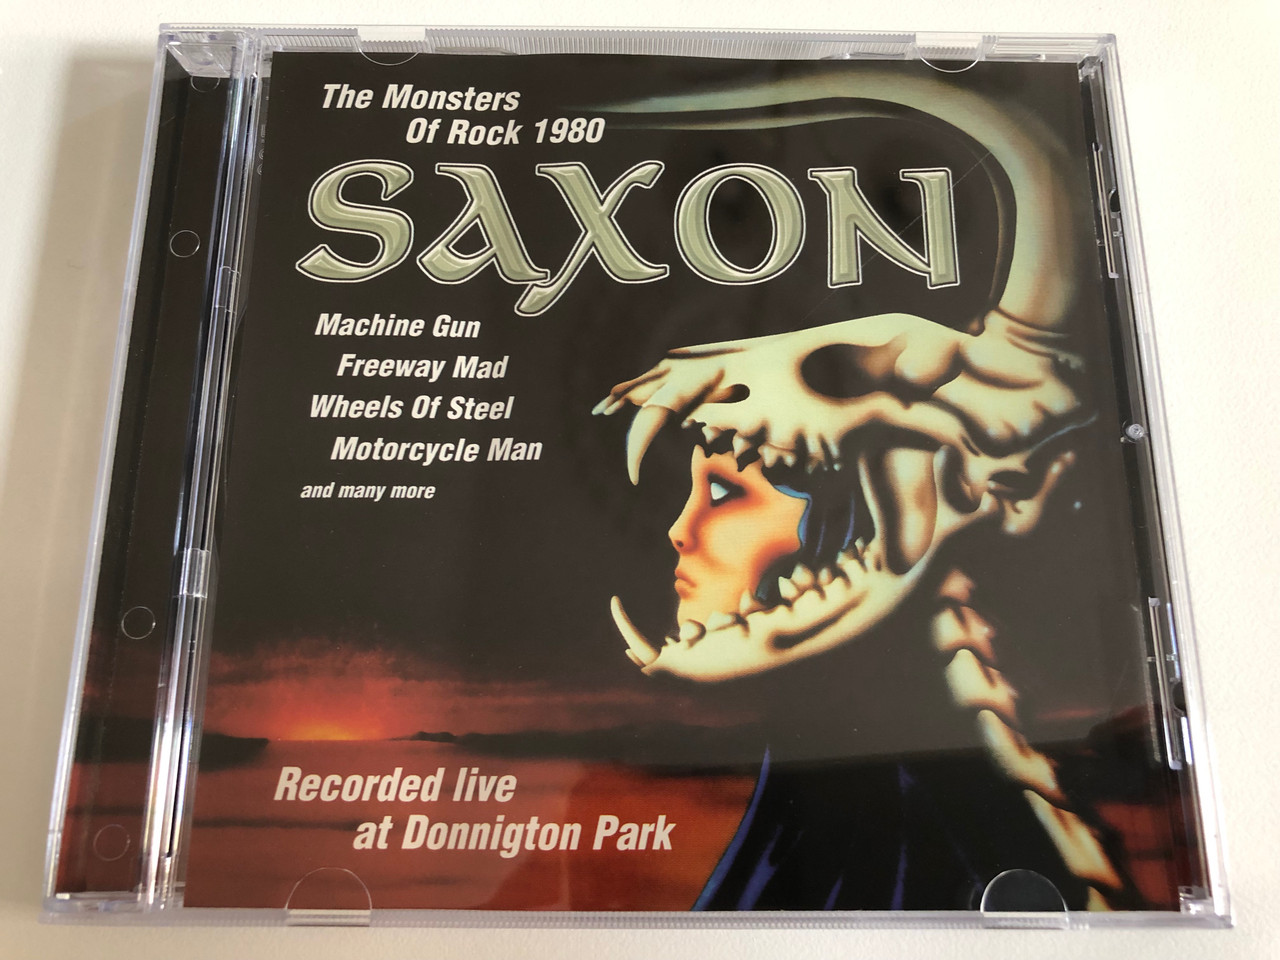 https://cdn10.bigcommerce.com/s-62bdpkt7pb/products/31258/images/184003/The_Monsters_Of_Rock_1980_-_Saxon_Recorded_Live_At_Donnigton_Park_Machine_Gun_Freeway_Mad_Wheels_Of_Steel_Motorcycle_Man_and_many_more_ACD_Audio_CD_Stereo_CD_154.319_1__64502.1625836519.1280.1280.JPG?c=2